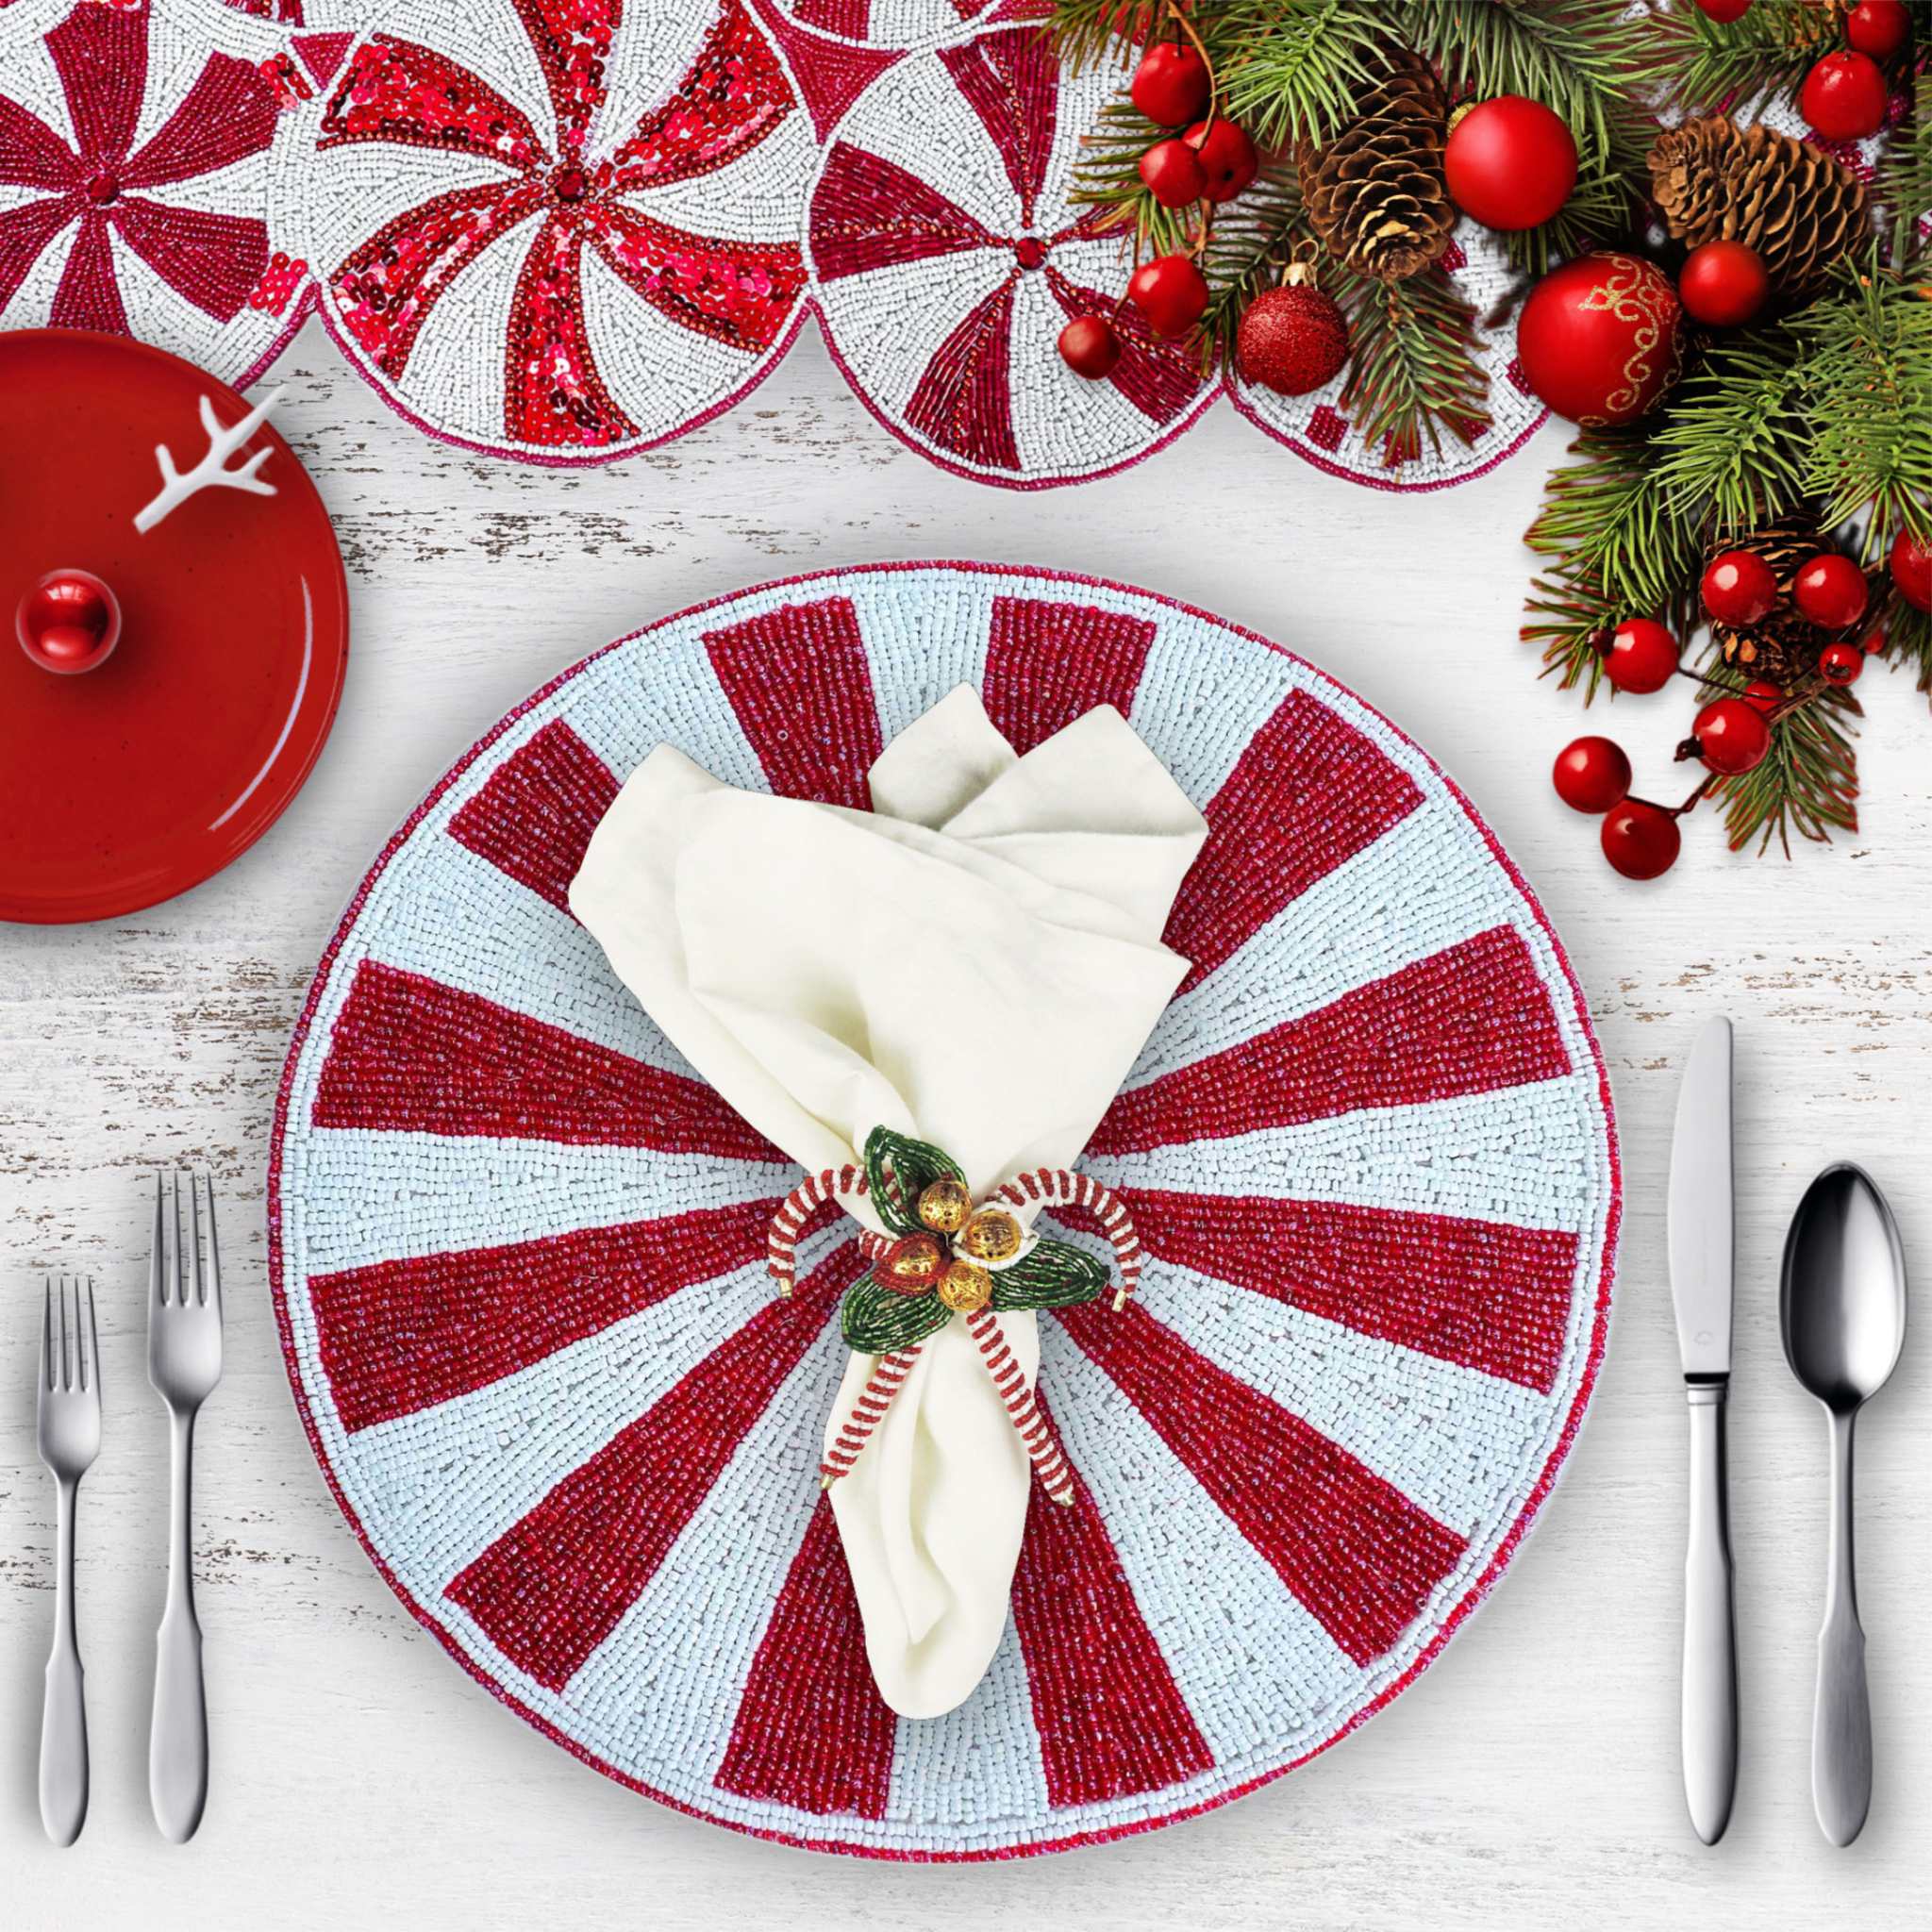 Minted Bead Table Setting for 4 - Embroidered Holiday Placemats, Napkin Rings & Table Runner in Red & White